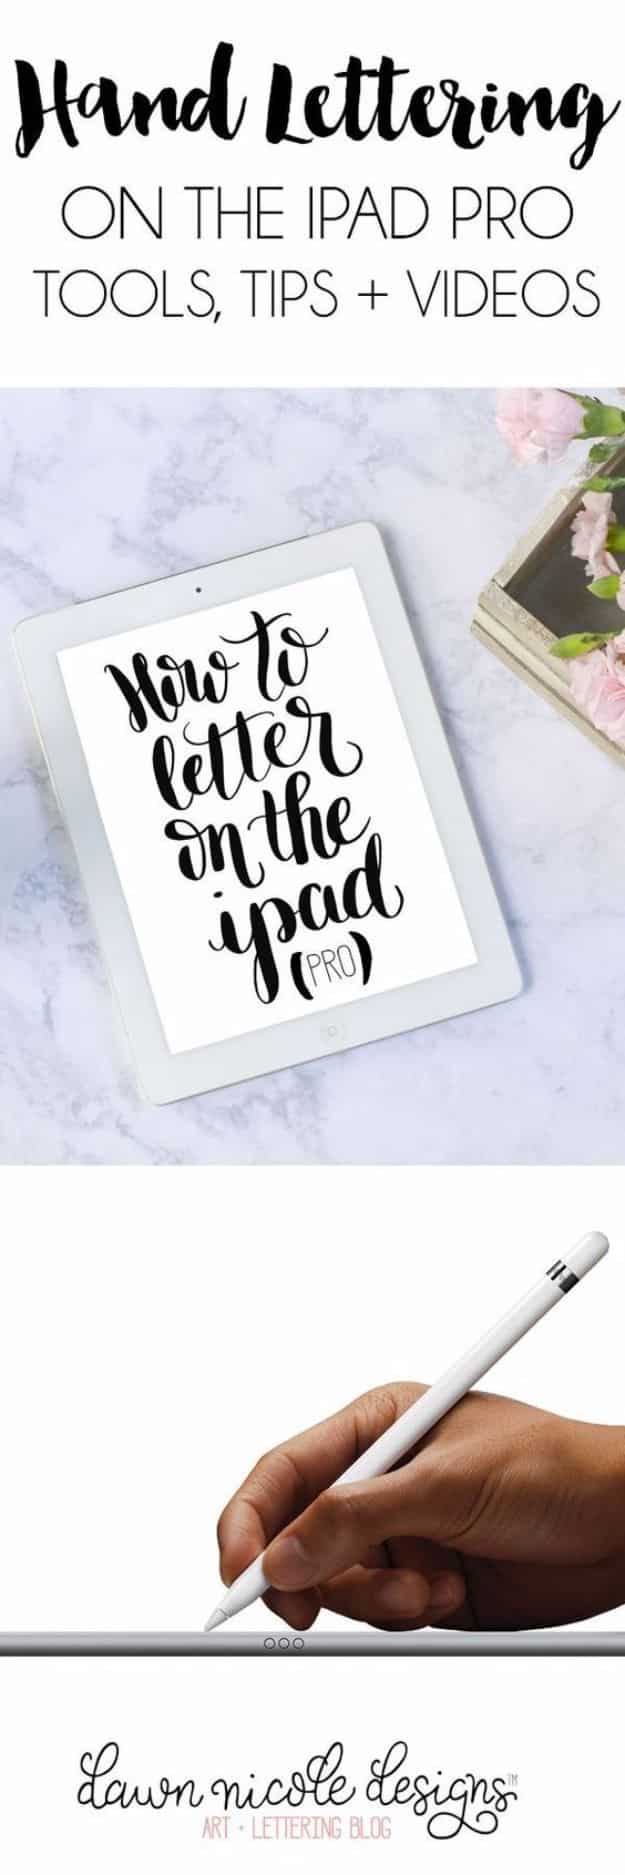 Best Ipad Tips and Tricks - Hand Lettering With Ipad - Awesome Ideas for Ways To Use Your Ipad - Tutorials and Shortcuts, Cool Apps for Kids, Life Hacks - Fun Ways to Use Phones and Ipads - Productivity Tips and Hidden Technology Shortcut Tricks